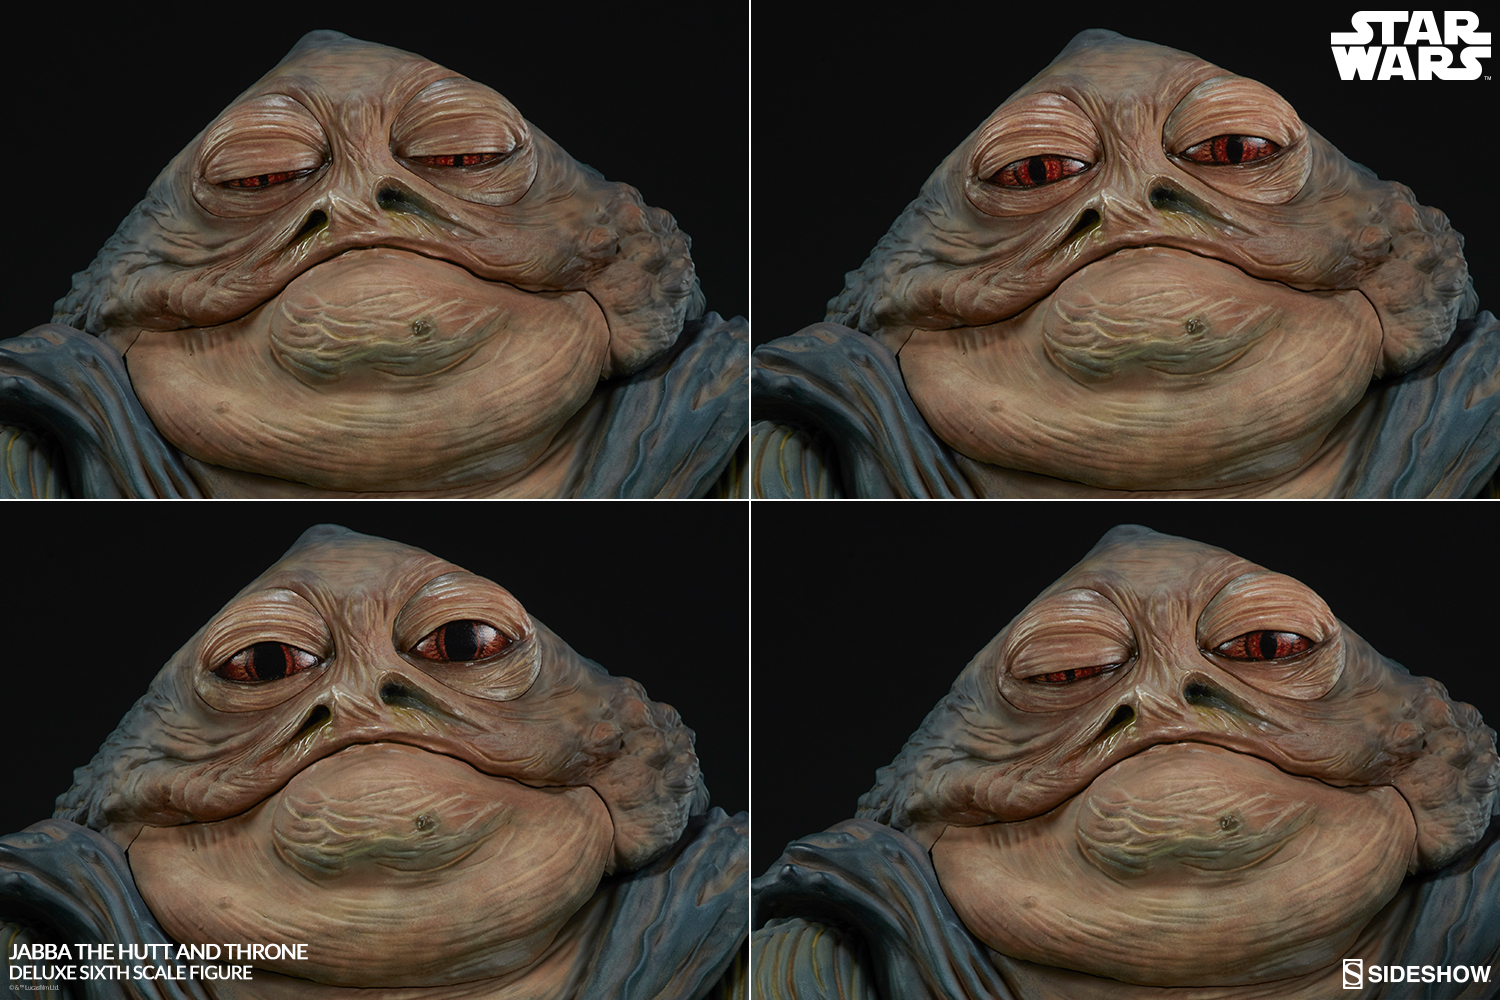 Star Wars Episode VI : Jabba the Hutt and throne - Deluxe Figure (Sideshow) 5eOKAusO_o